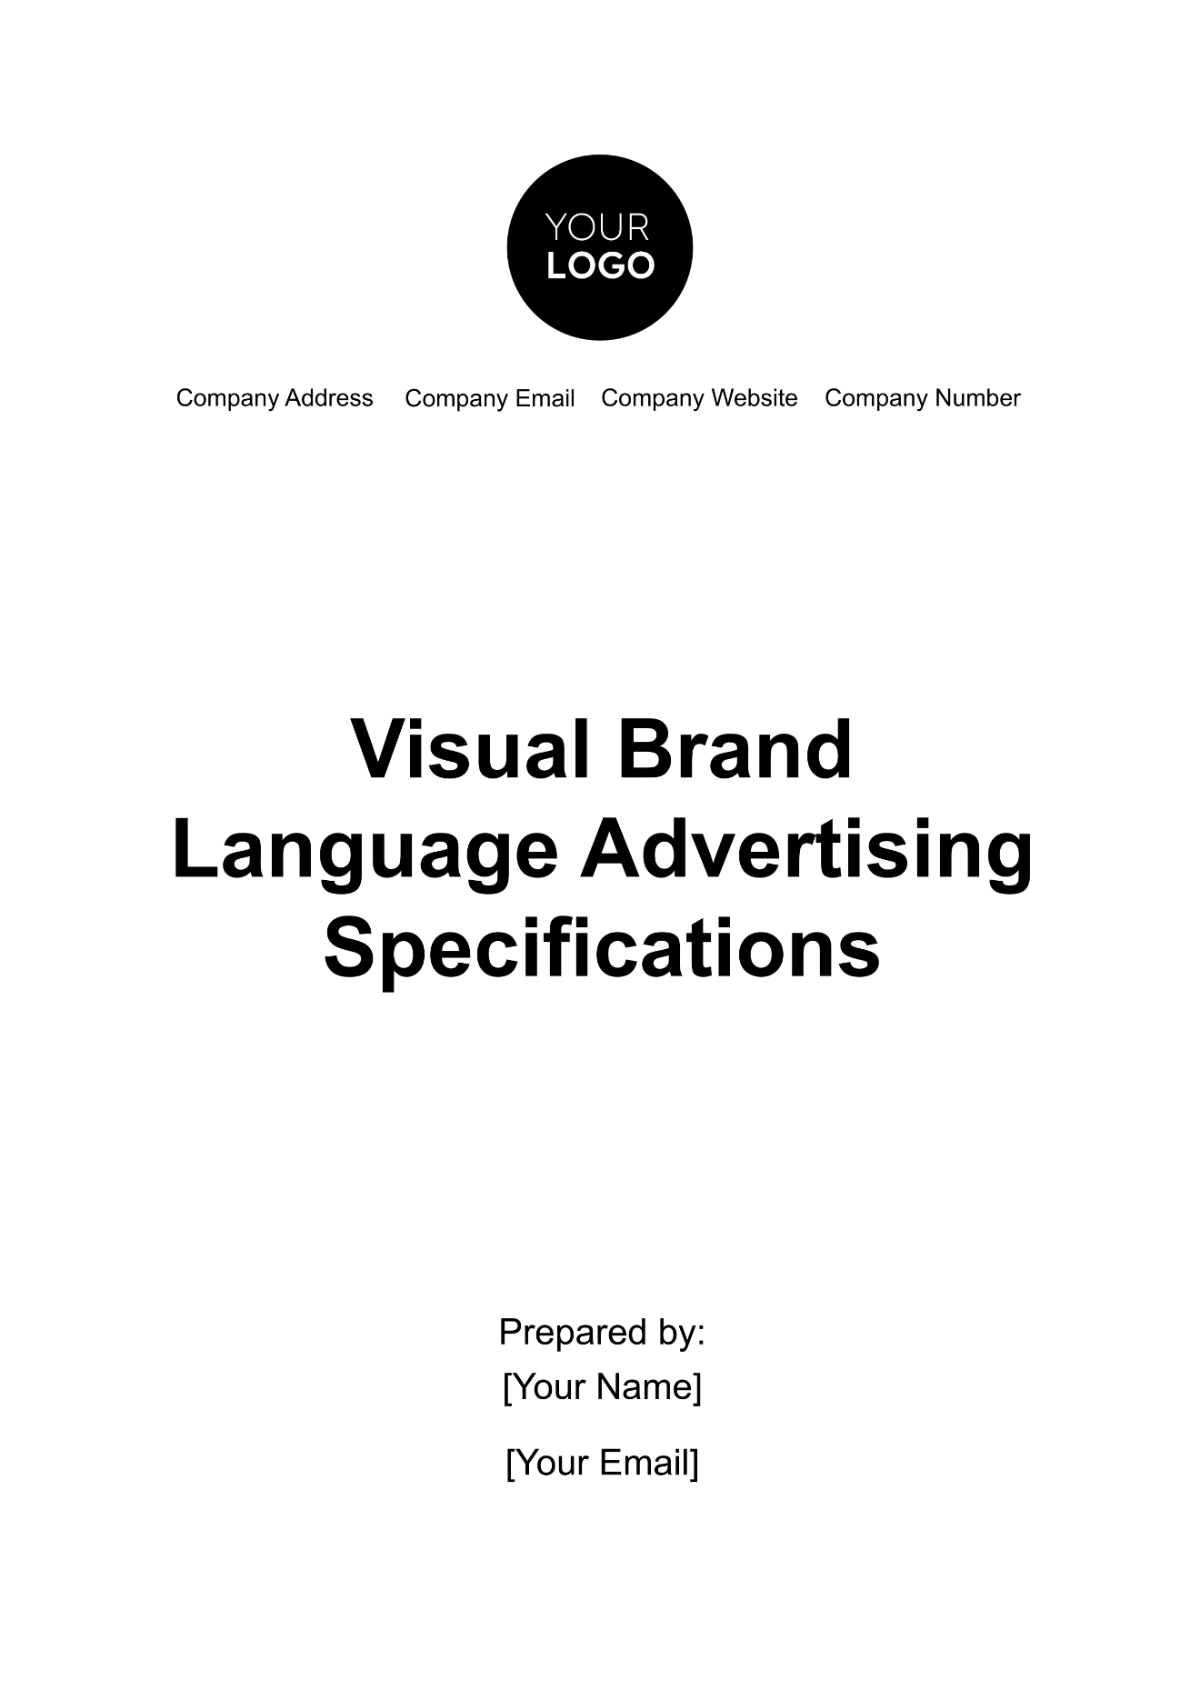 Visual Brand Language Advertising Specification Template